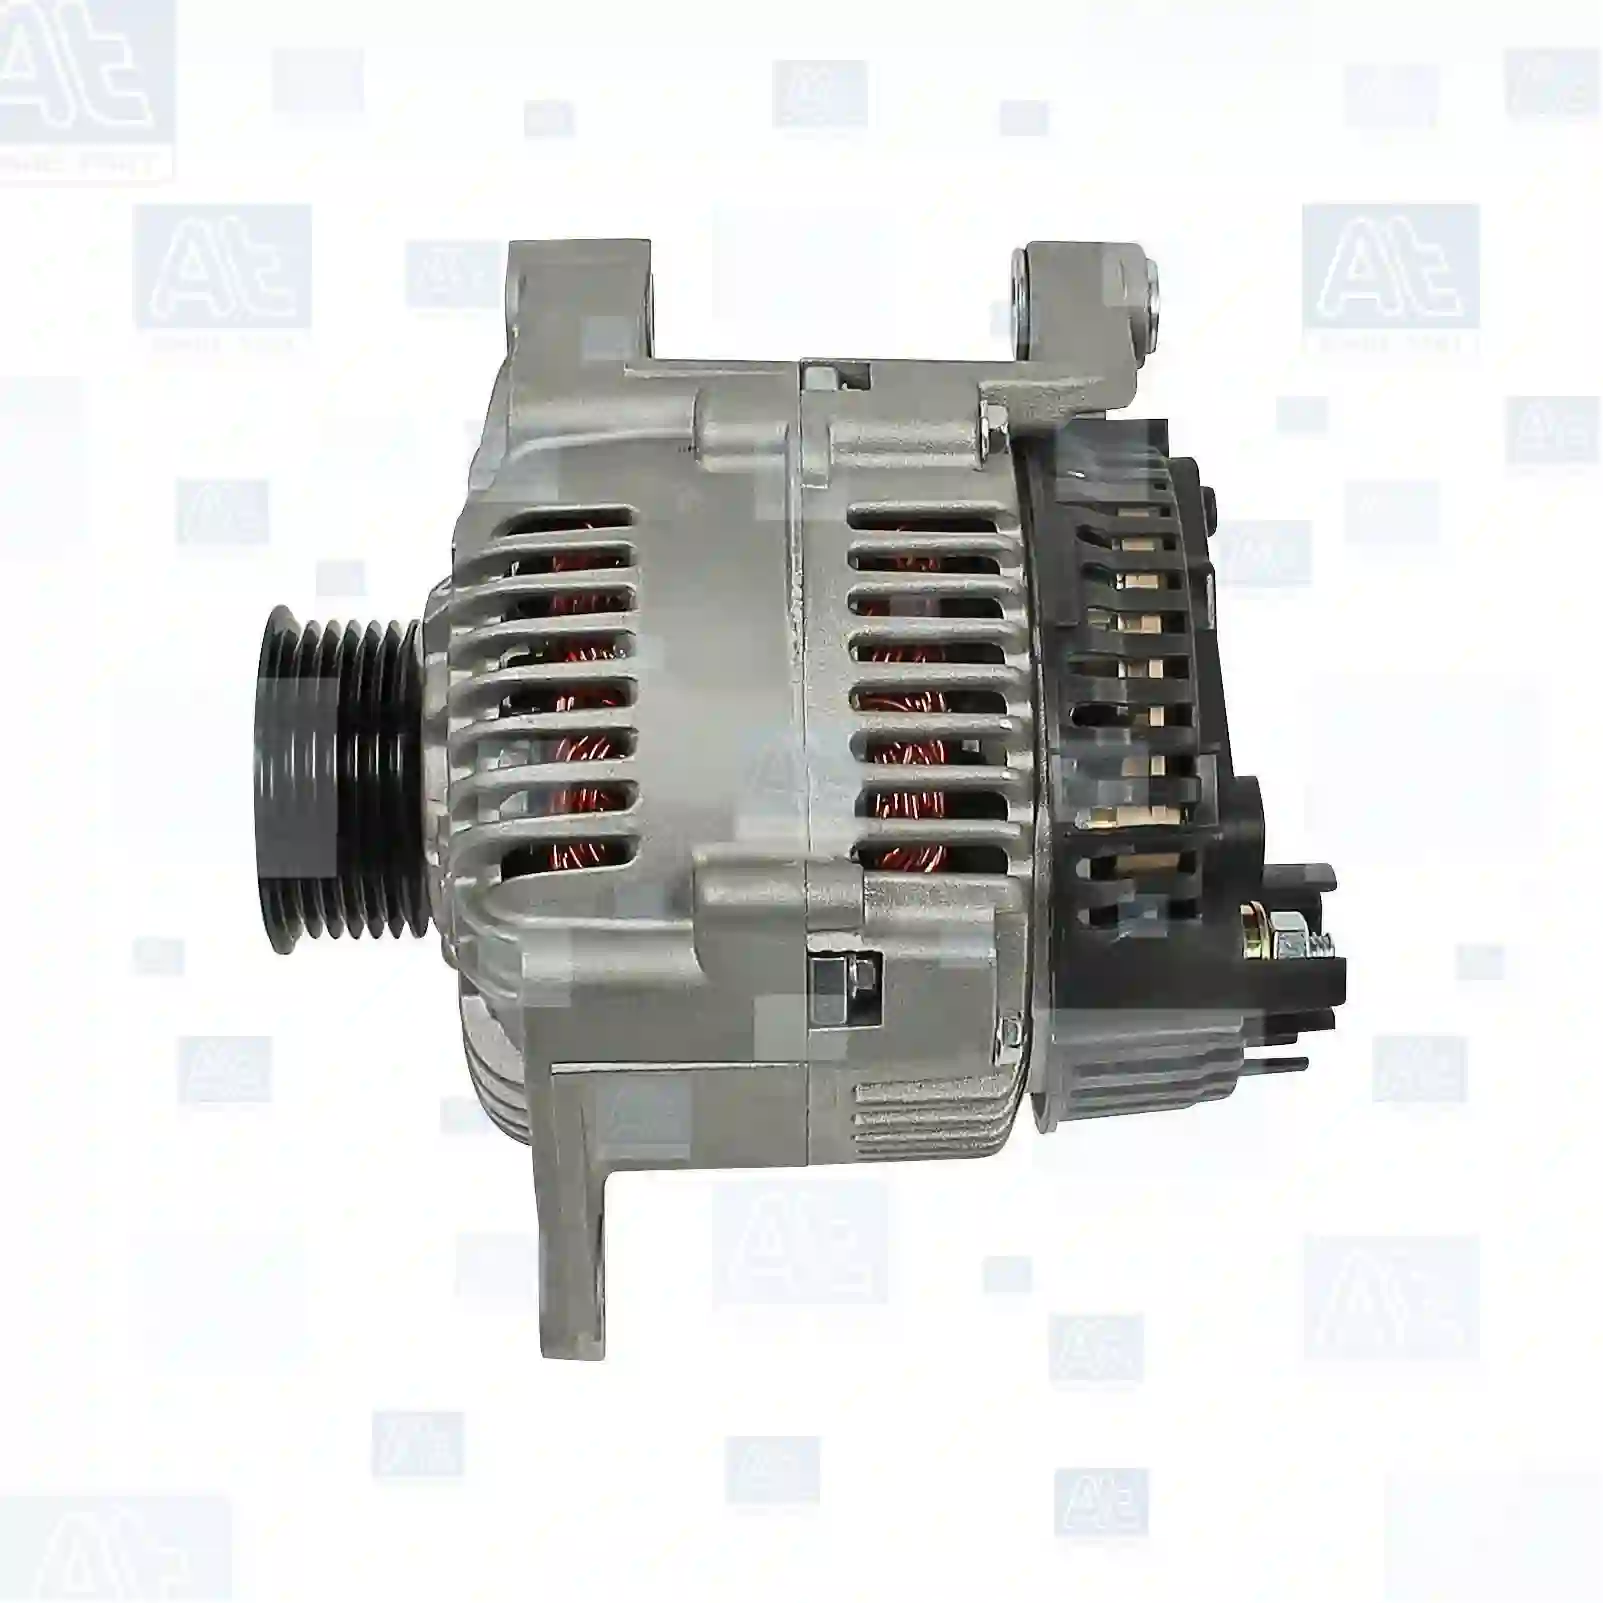 Alternator, 77711554, 5701A4, 5705A2, 5705C5, 5705E6, 5705EG, 5705HT, 5705L0, 5705M8, 5705M9, 5705T5, 5805E6, 9611366880, 9611369580, 9612257180, 9631318580, 9652249280, 9655249280, 9611366880, 9655249280, 71716668, 9611365980, 9611366880, 9611369580, 9612257180, 9631318580, 9655249280, 9611366880, 9655249280, SA214, 944356964, 5701A4, 5705A2, 5705C5, 5705E6, 5705EG, 5705HT, 5705L0, 5705M8, 5705M9, 5705T5, 5805E6, 9611366880, 9611369580, 9612257180, 9631318580, 9652249280, 9655249280 ||  77711554 At Spare Part | Engine, Accelerator Pedal, Camshaft, Connecting Rod, Crankcase, Crankshaft, Cylinder Head, Engine Suspension Mountings, Exhaust Manifold, Exhaust Gas Recirculation, Filter Kits, Flywheel Housing, General Overhaul Kits, Engine, Intake Manifold, Oil Cleaner, Oil Cooler, Oil Filter, Oil Pump, Oil Sump, Piston & Liner, Sensor & Switch, Timing Case, Turbocharger, Cooling System, Belt Tensioner, Coolant Filter, Coolant Pipe, Corrosion Prevention Agent, Drive, Expansion Tank, Fan, Intercooler, Monitors & Gauges, Radiator, Thermostat, V-Belt / Timing belt, Water Pump, Fuel System, Electronical Injector Unit, Feed Pump, Fuel Filter, cpl., Fuel Gauge Sender,  Fuel Line, Fuel Pump, Fuel Tank, Injection Line Kit, Injection Pump, Exhaust System, Clutch & Pedal, Gearbox, Propeller Shaft, Axles, Brake System, Hubs & Wheels, Suspension, Leaf Spring, Universal Parts / Accessories, Steering, Electrical System, Cabin Alternator, 77711554, 5701A4, 5705A2, 5705C5, 5705E6, 5705EG, 5705HT, 5705L0, 5705M8, 5705M9, 5705T5, 5805E6, 9611366880, 9611369580, 9612257180, 9631318580, 9652249280, 9655249280, 9611366880, 9655249280, 71716668, 9611365980, 9611366880, 9611369580, 9612257180, 9631318580, 9655249280, 9611366880, 9655249280, SA214, 944356964, 5701A4, 5705A2, 5705C5, 5705E6, 5705EG, 5705HT, 5705L0, 5705M8, 5705M9, 5705T5, 5805E6, 9611366880, 9611369580, 9612257180, 9631318580, 9652249280, 9655249280 ||  77711554 At Spare Part | Engine, Accelerator Pedal, Camshaft, Connecting Rod, Crankcase, Crankshaft, Cylinder Head, Engine Suspension Mountings, Exhaust Manifold, Exhaust Gas Recirculation, Filter Kits, Flywheel Housing, General Overhaul Kits, Engine, Intake Manifold, Oil Cleaner, Oil Cooler, Oil Filter, Oil Pump, Oil Sump, Piston & Liner, Sensor & Switch, Timing Case, Turbocharger, Cooling System, Belt Tensioner, Coolant Filter, Coolant Pipe, Corrosion Prevention Agent, Drive, Expansion Tank, Fan, Intercooler, Monitors & Gauges, Radiator, Thermostat, V-Belt / Timing belt, Water Pump, Fuel System, Electronical Injector Unit, Feed Pump, Fuel Filter, cpl., Fuel Gauge Sender,  Fuel Line, Fuel Pump, Fuel Tank, Injection Line Kit, Injection Pump, Exhaust System, Clutch & Pedal, Gearbox, Propeller Shaft, Axles, Brake System, Hubs & Wheels, Suspension, Leaf Spring, Universal Parts / Accessories, Steering, Electrical System, Cabin